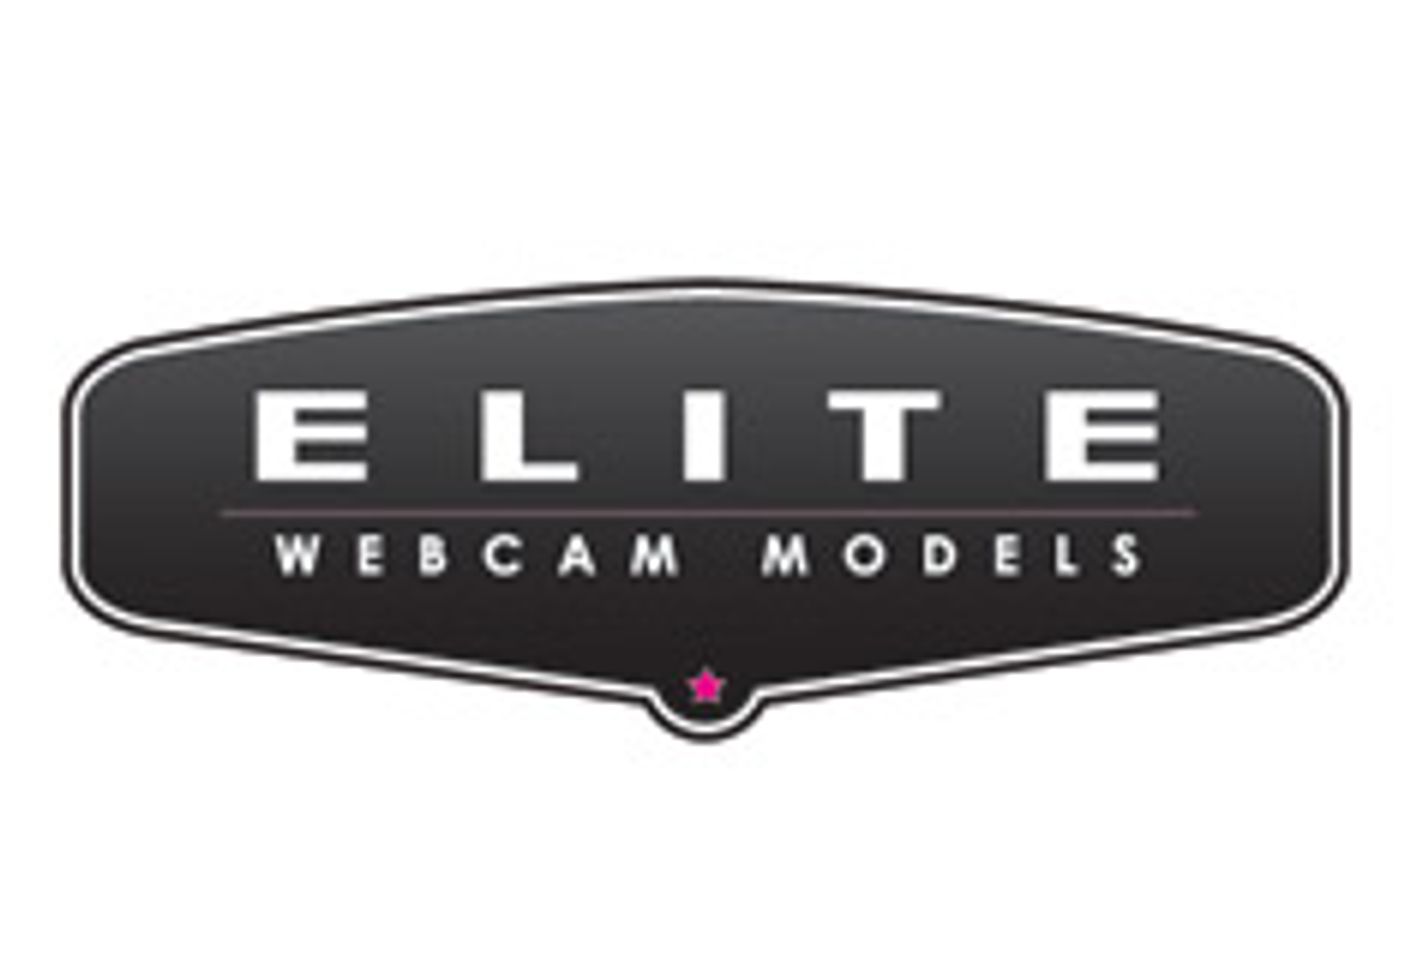 Elite Webcam Models Upgrades Site and Attends AEE